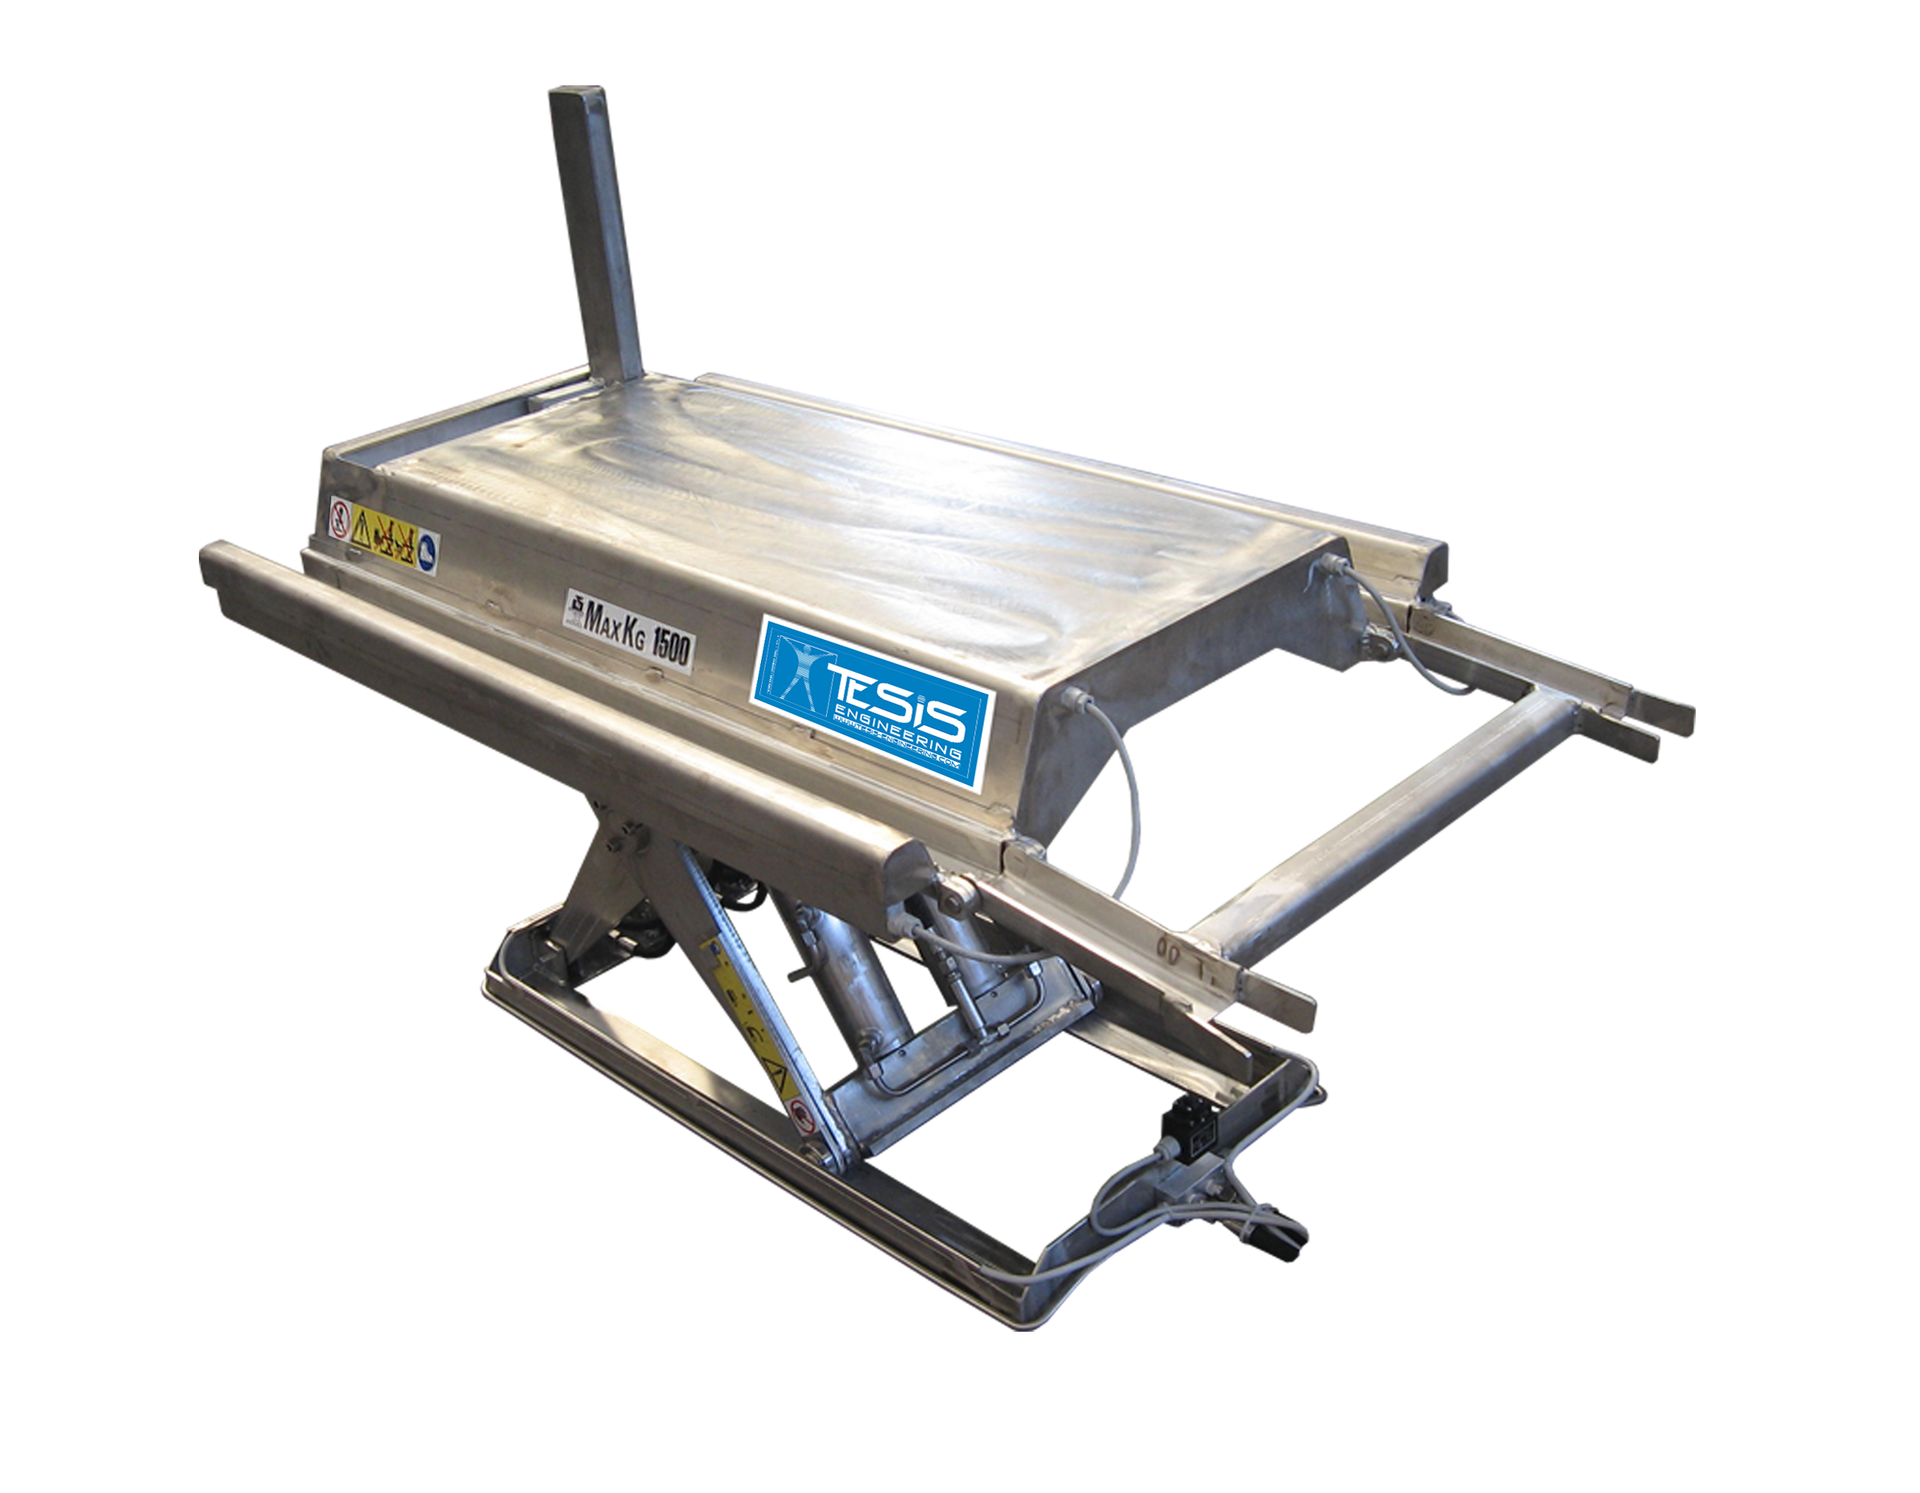 Stainless steel lift table for autoclave loading, stainless steel scissor lift table with shaped top, customized stainless steel pantograph platform lift